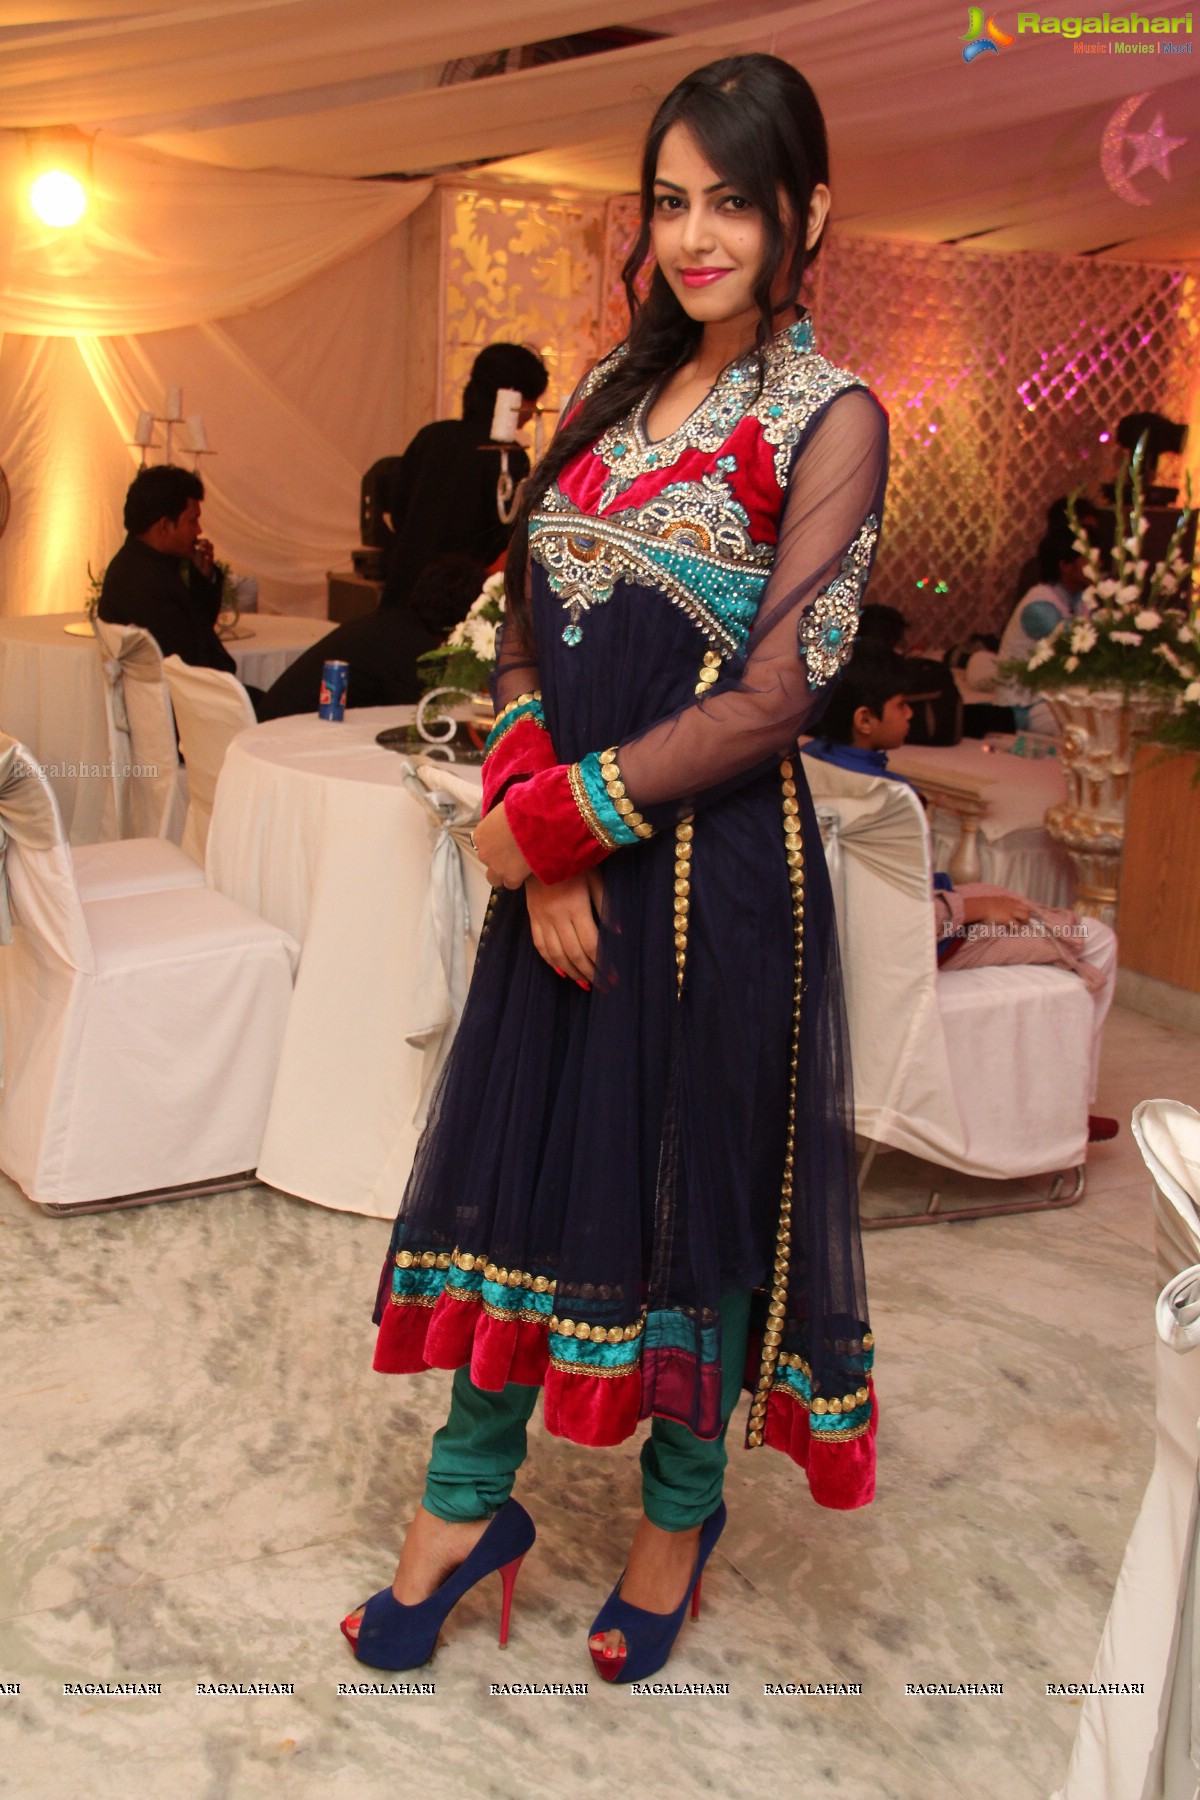 Eid Dinner Party 2014 at Naijer Function Hall, Hyderabad